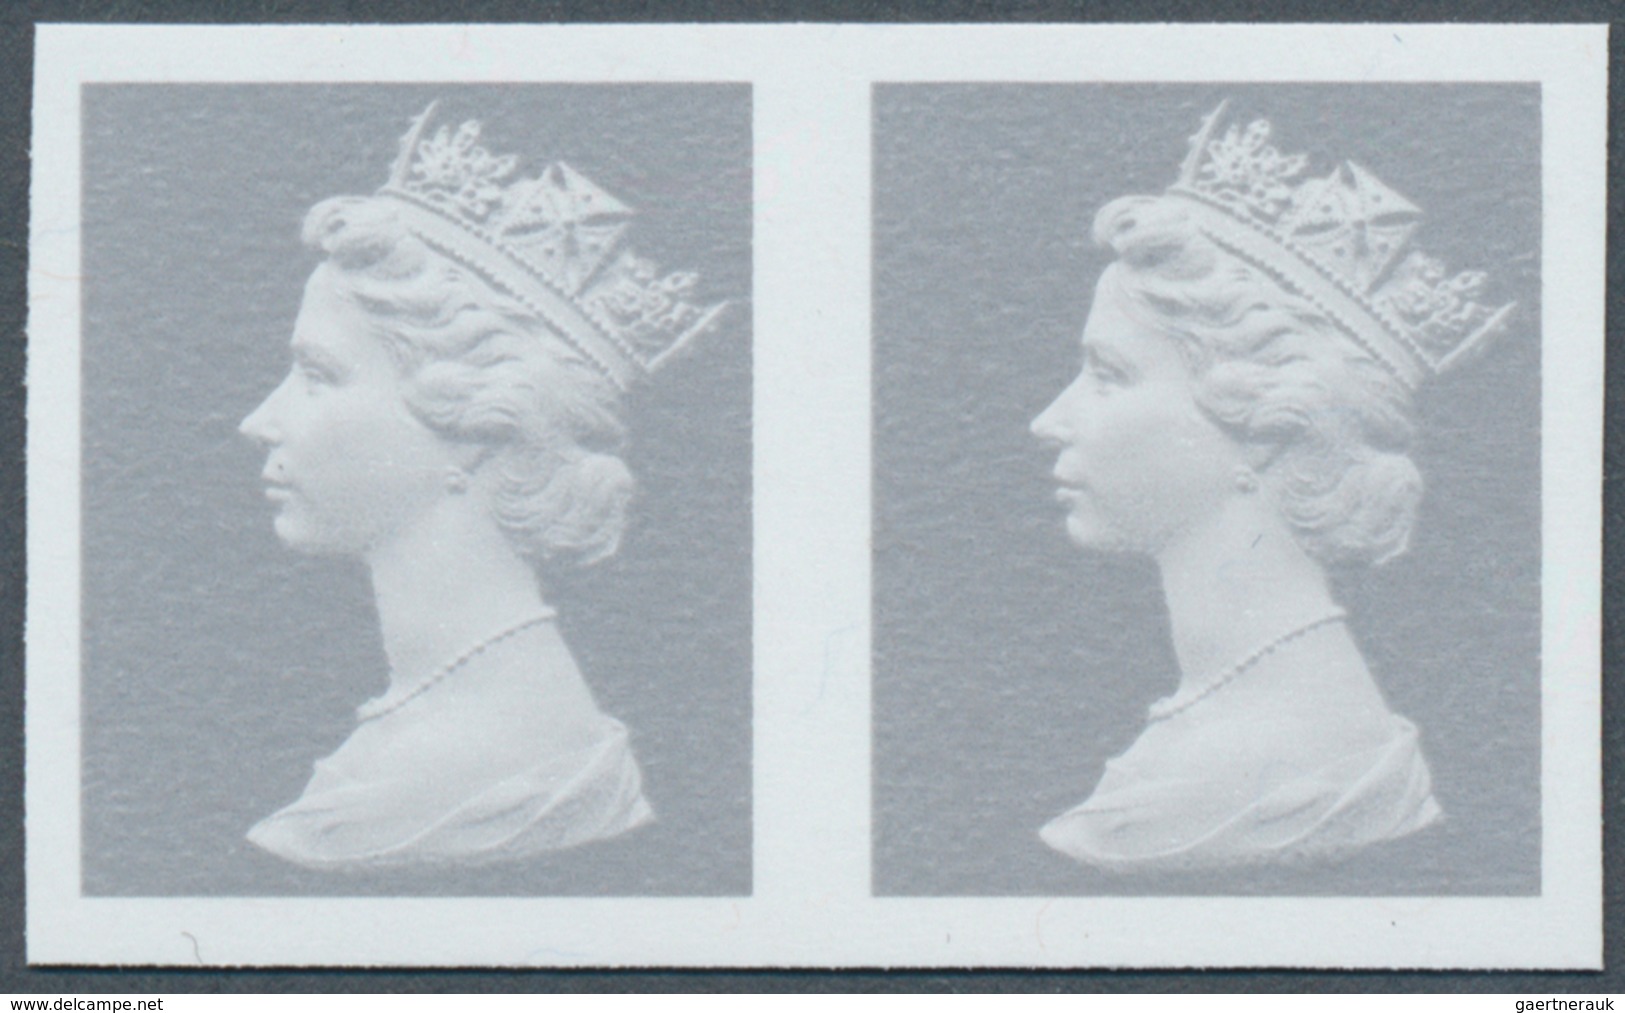 Großbritannien - Machin: 1997, Imperforate Proof In Issued Design Without Value On Gummed Paper, Hor - Série 'Machin'